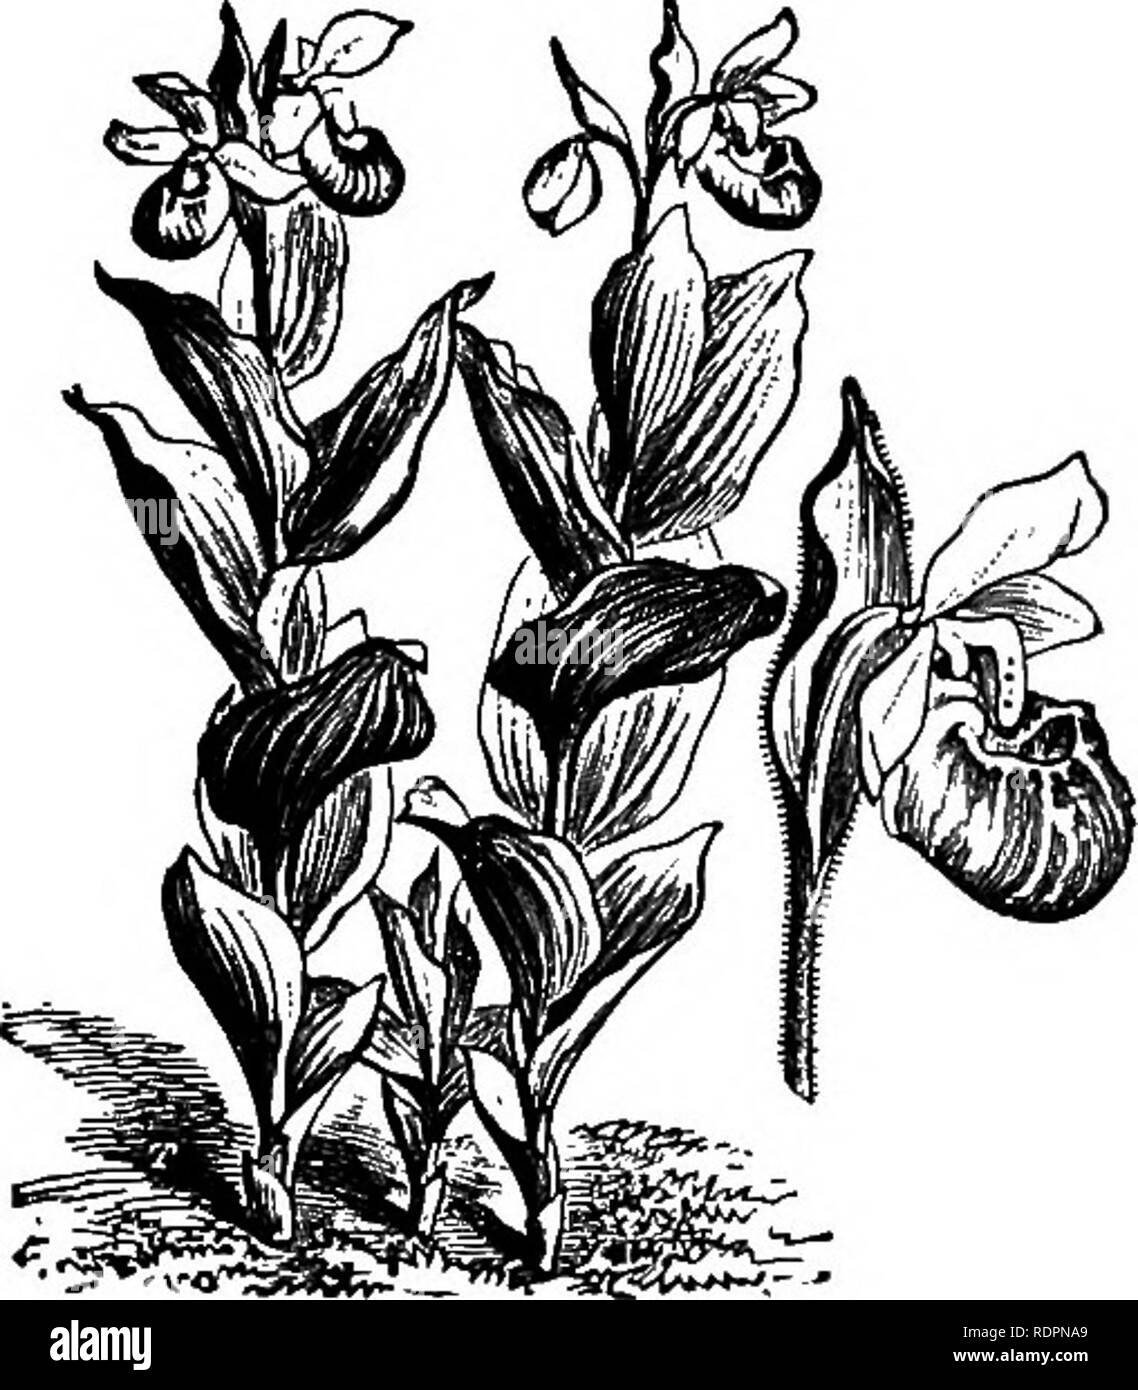 . The orchid-grower's manual, containing descriptions of the best species and varieties of orchidaceous plants in cultivation ... Orchids. CYRTOPERA. 317 C. WIACRANTHUM, 8'wartz.âOne of the finest and most distinct of tho terrestrial section. It grows about 10 inches high, has oblong acute leaves, apd produces its charming large purple flowers early in June.âSiberia; Altai. 'Fm.âBot. Mag., t. 2938 ; Bof. Re//., t. 1534 ; Gmcl Sibir., i. p. 2, t. 1 ; Uoultcr, First Cent. Orch. PL, t. 100; L'OrehidophUe, 1887, p. 175. C. PARVIFLORUM, Salish.â^A handsome fragrant species, somewhat re- sembling C. Stock Photo